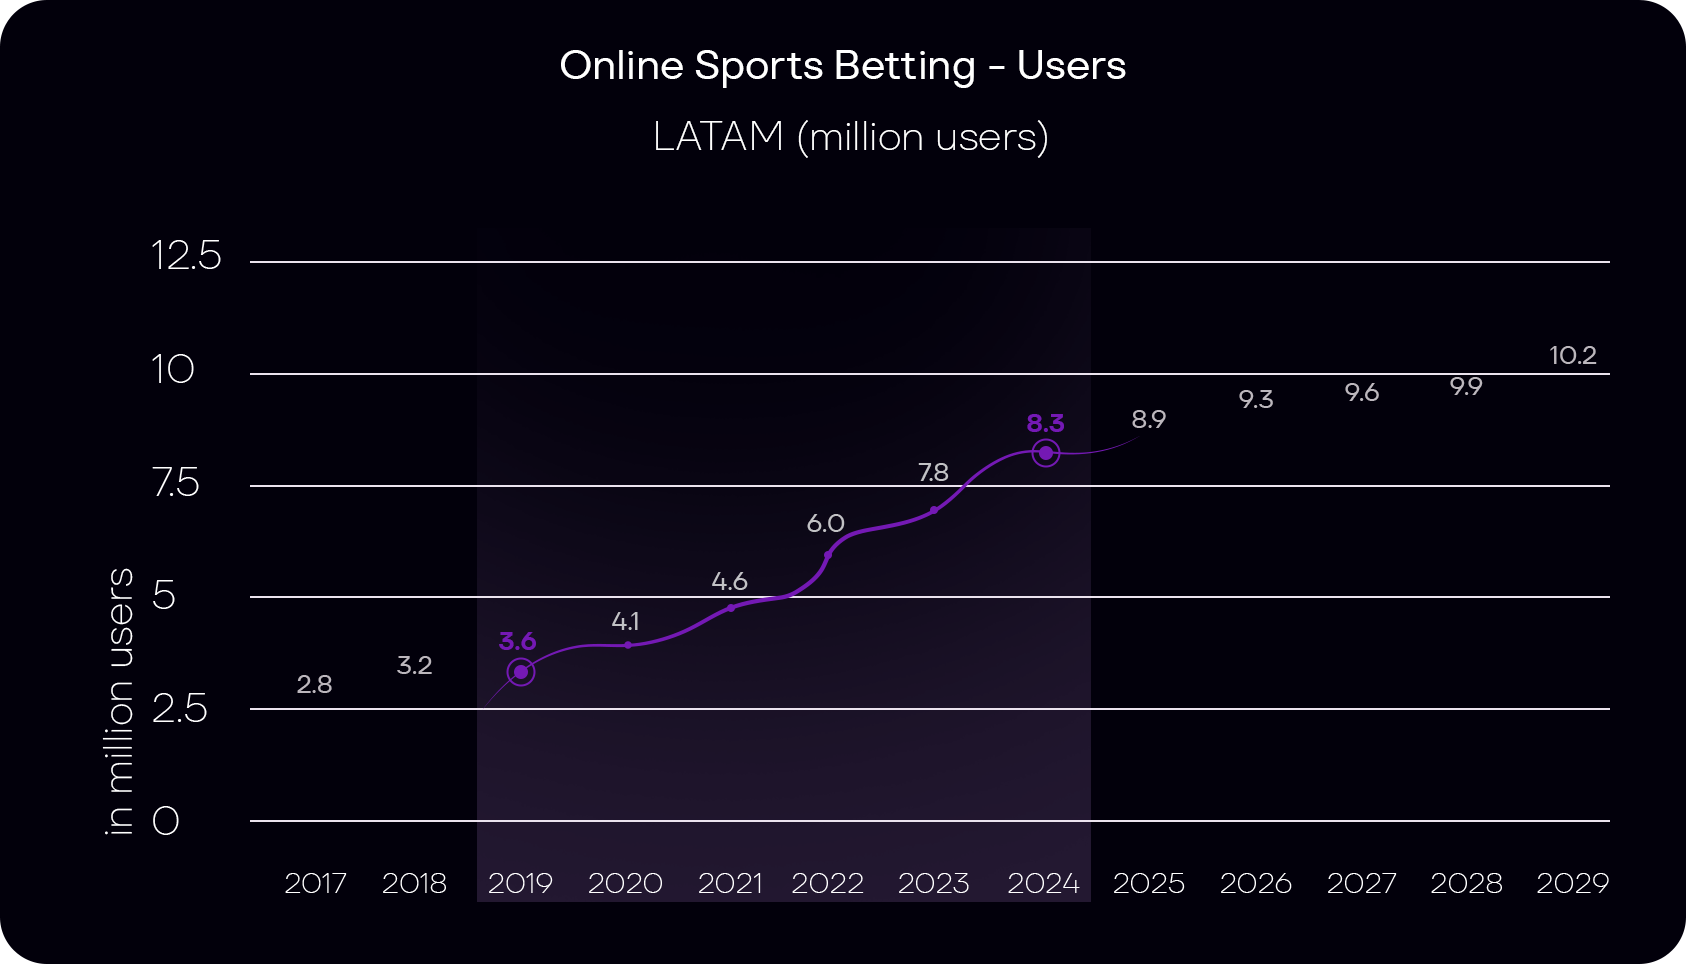 The chart depicting the increase of online sports betting users in Latin America